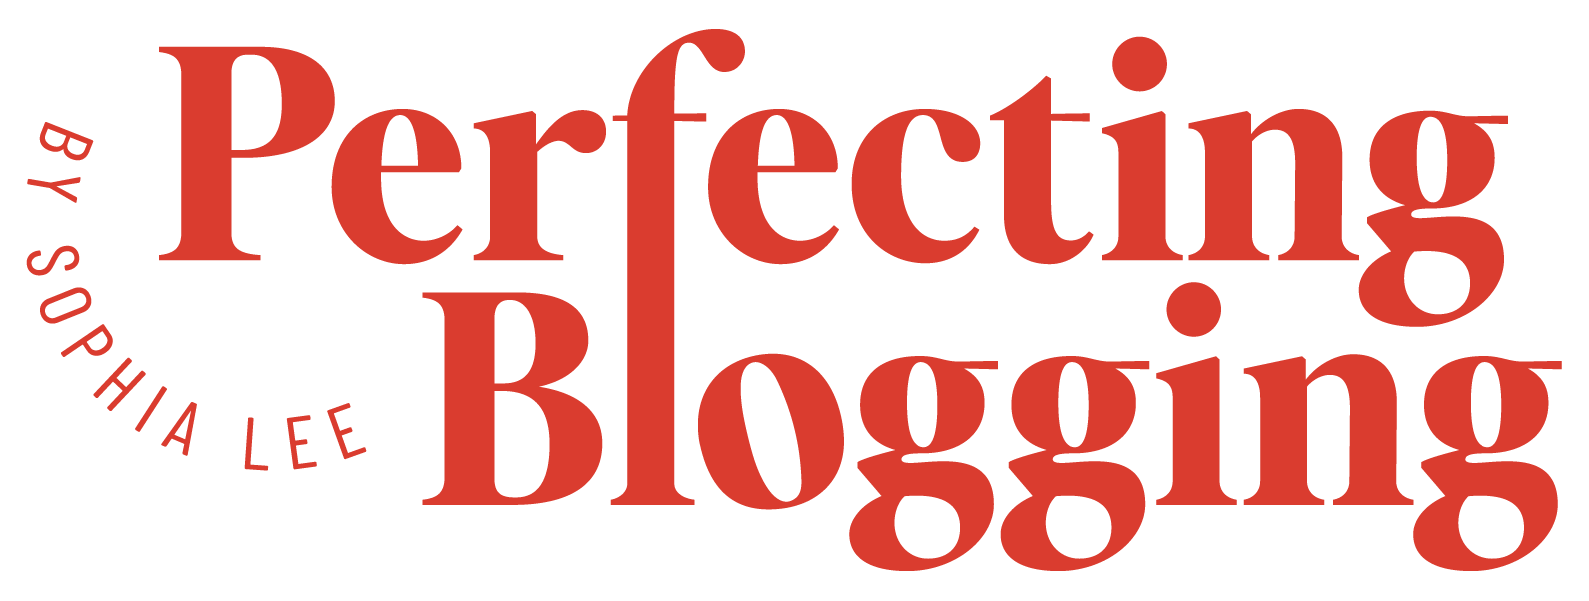 Perfecting Blogging Course By Sophia Lee - Free Download